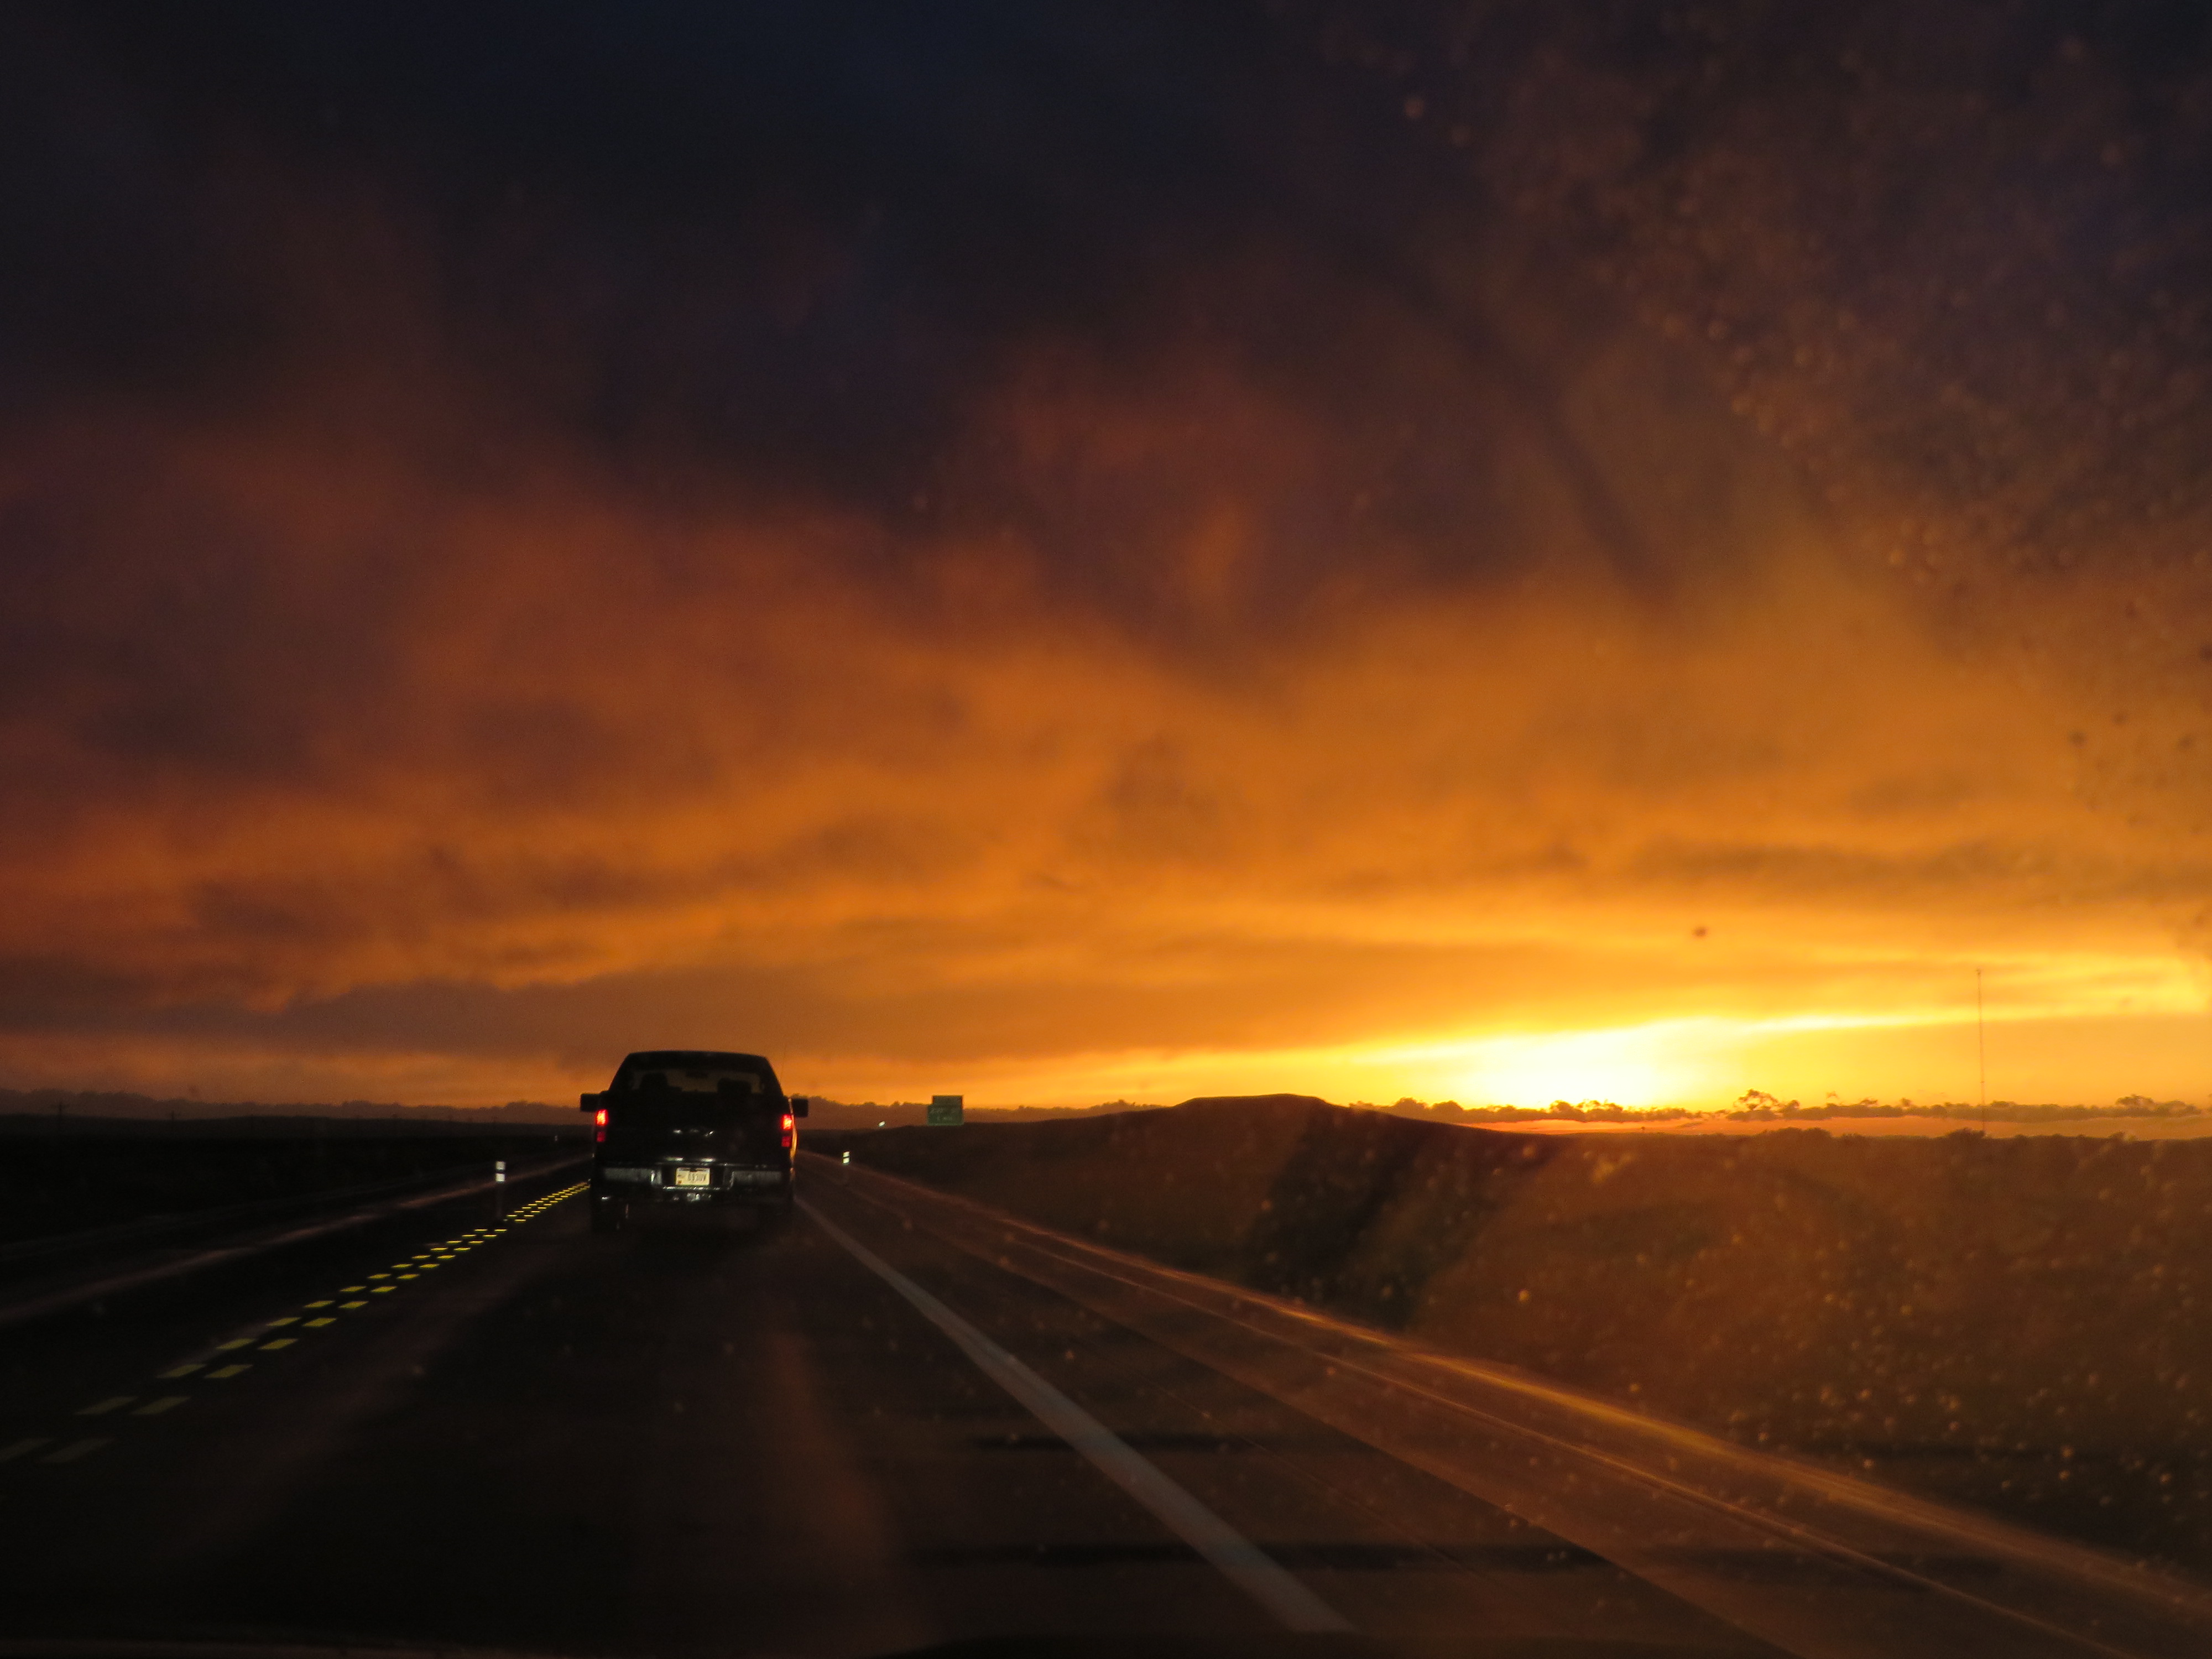 Sunset at the End of Scary Drive Through South Dakota Thunderstorm